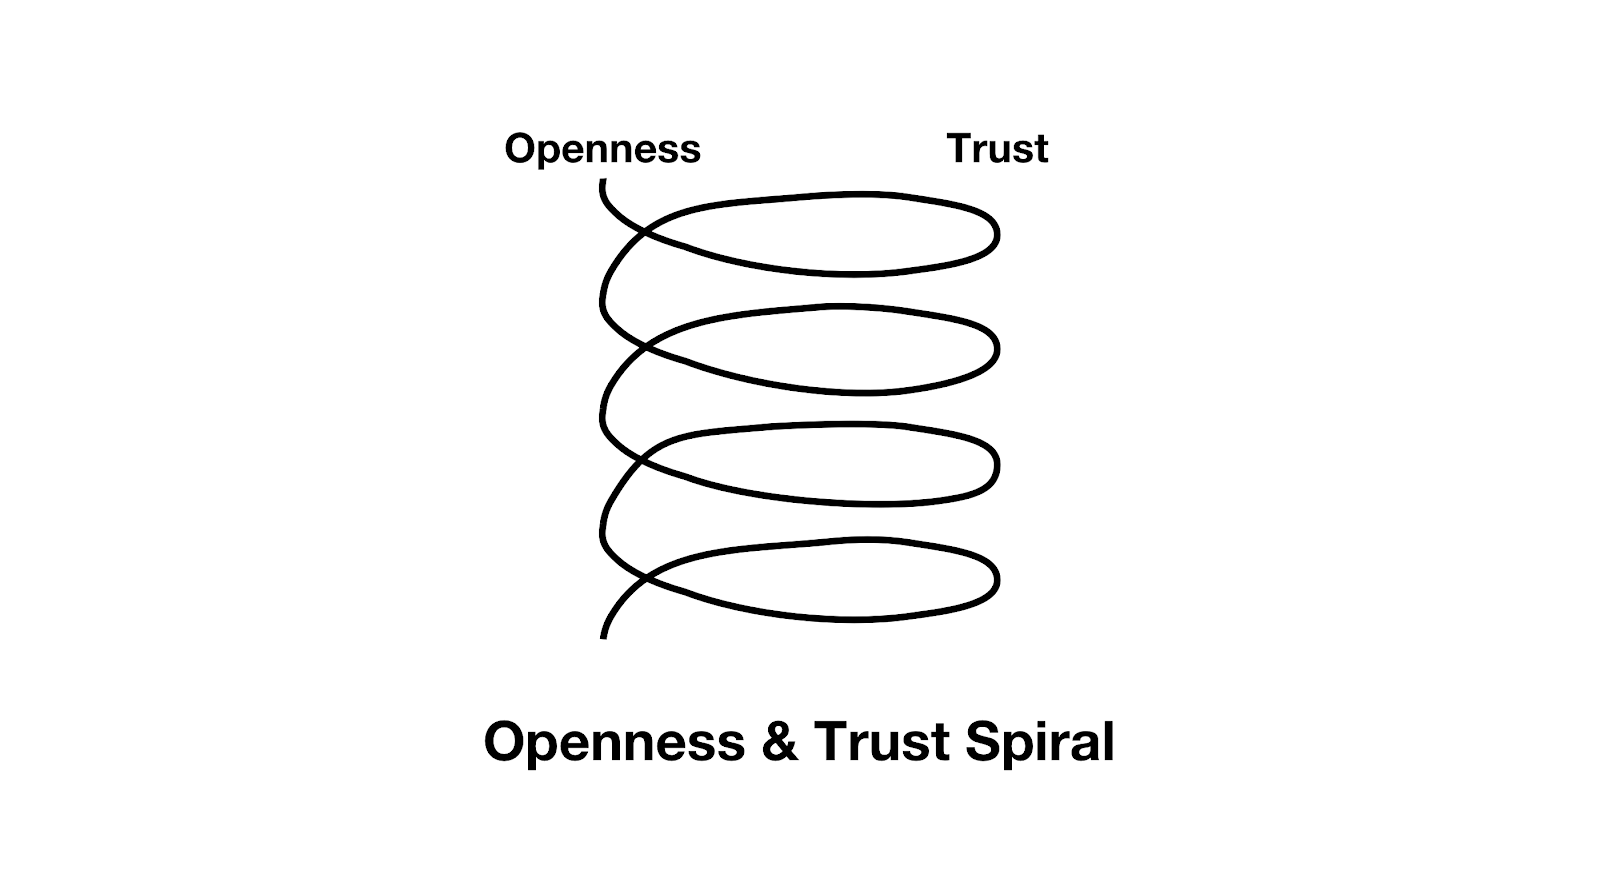 openness and trust upwards spiral